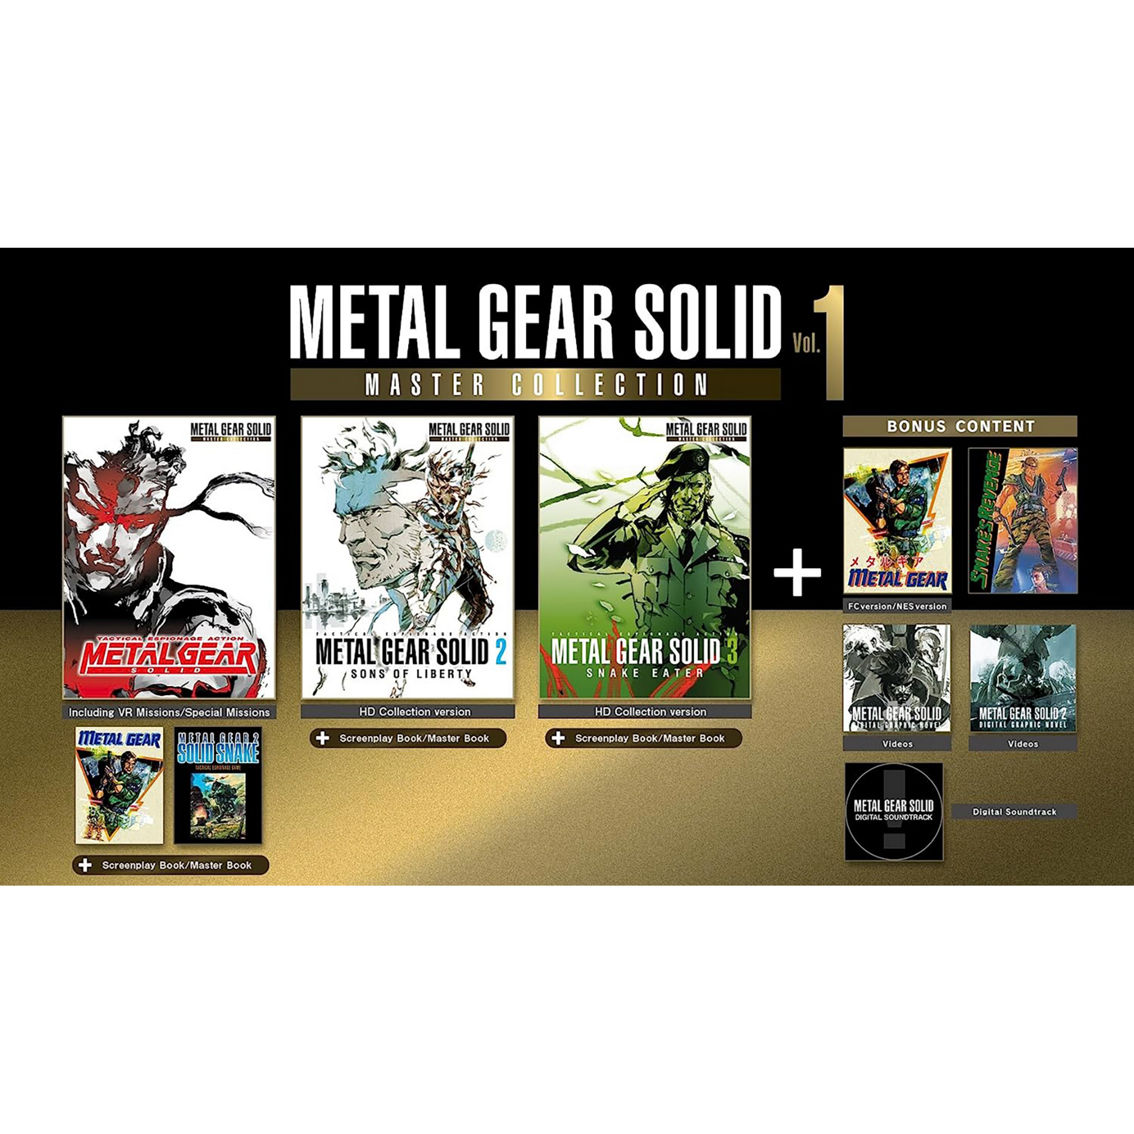 Metal Gear Solid: Master Collection Vol.1 (PS5) - Image 6 of 6